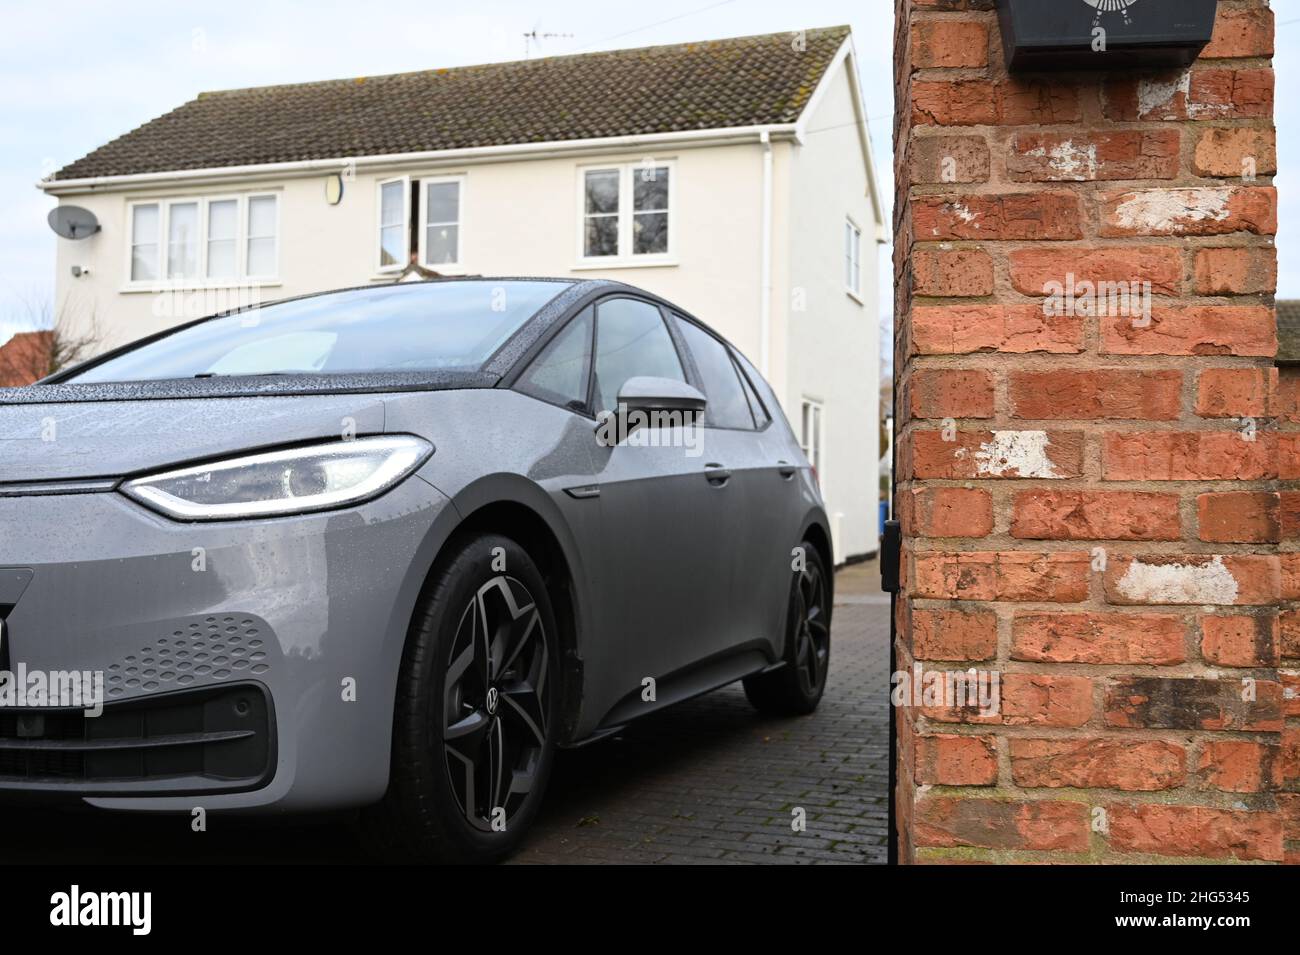 A view of an electric grey car leaving a rural property with a cream render passing a brick pillar on a block drivewayV Stock Photo